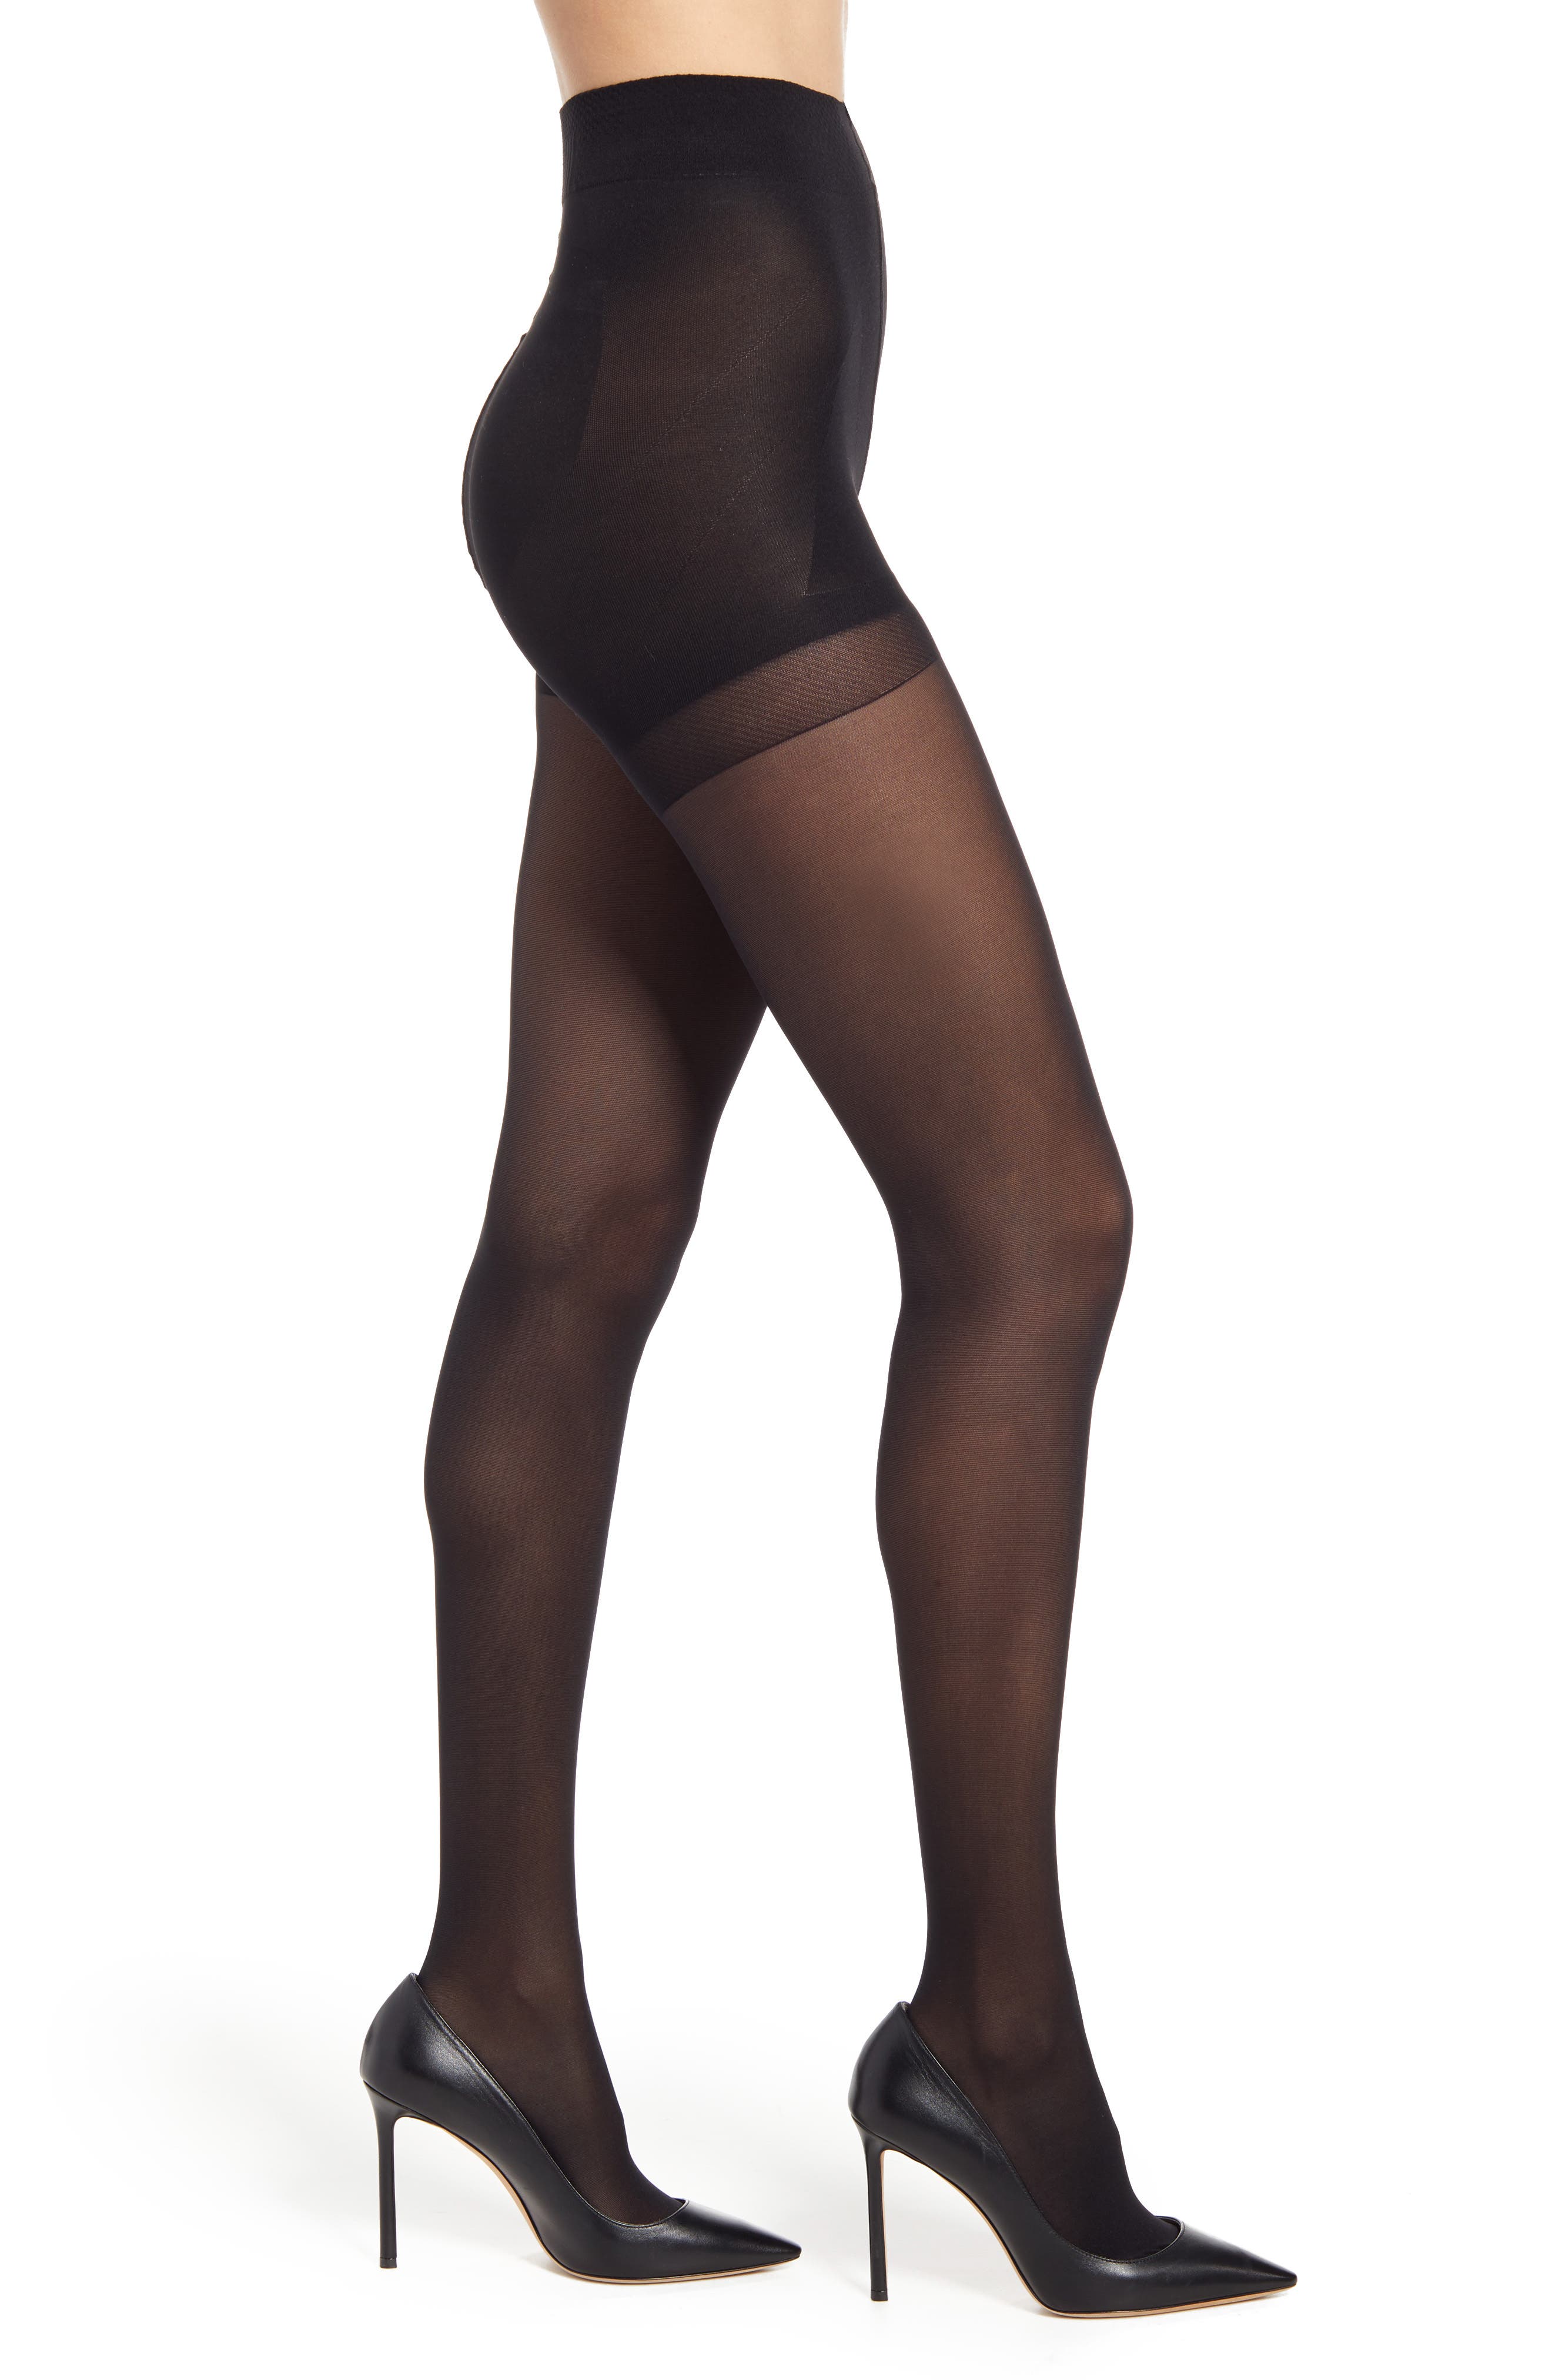 Swedish Stockings Anna Control Top Semi Opaque Tights in Charcoal at Nordstrom